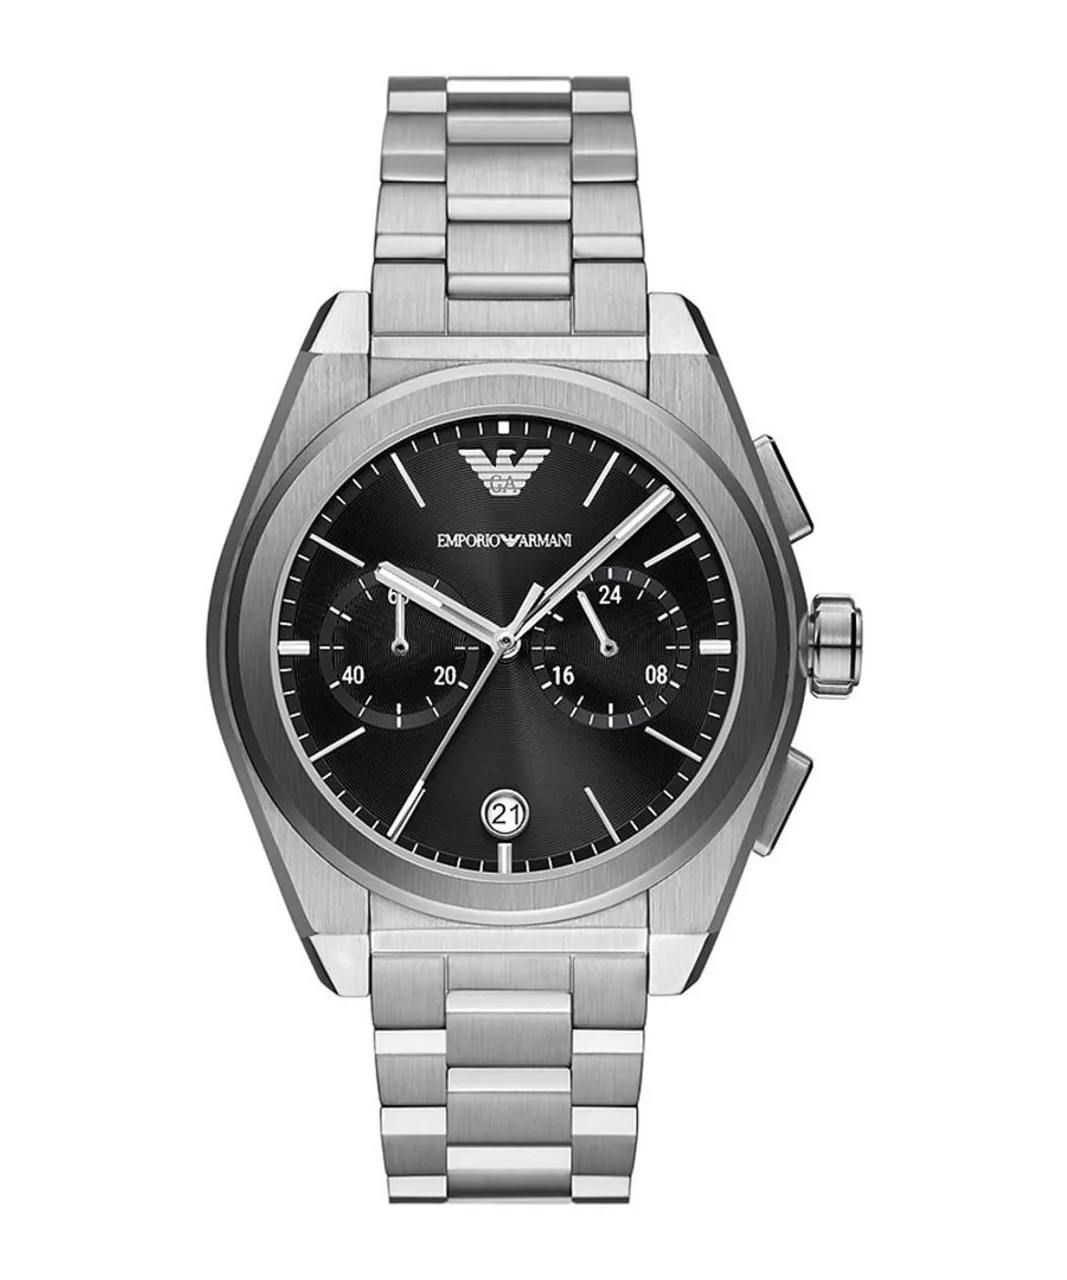 Emporio Armani Federico Mens Silver Watch AR11560 Stainless Steel (archived) - One Size